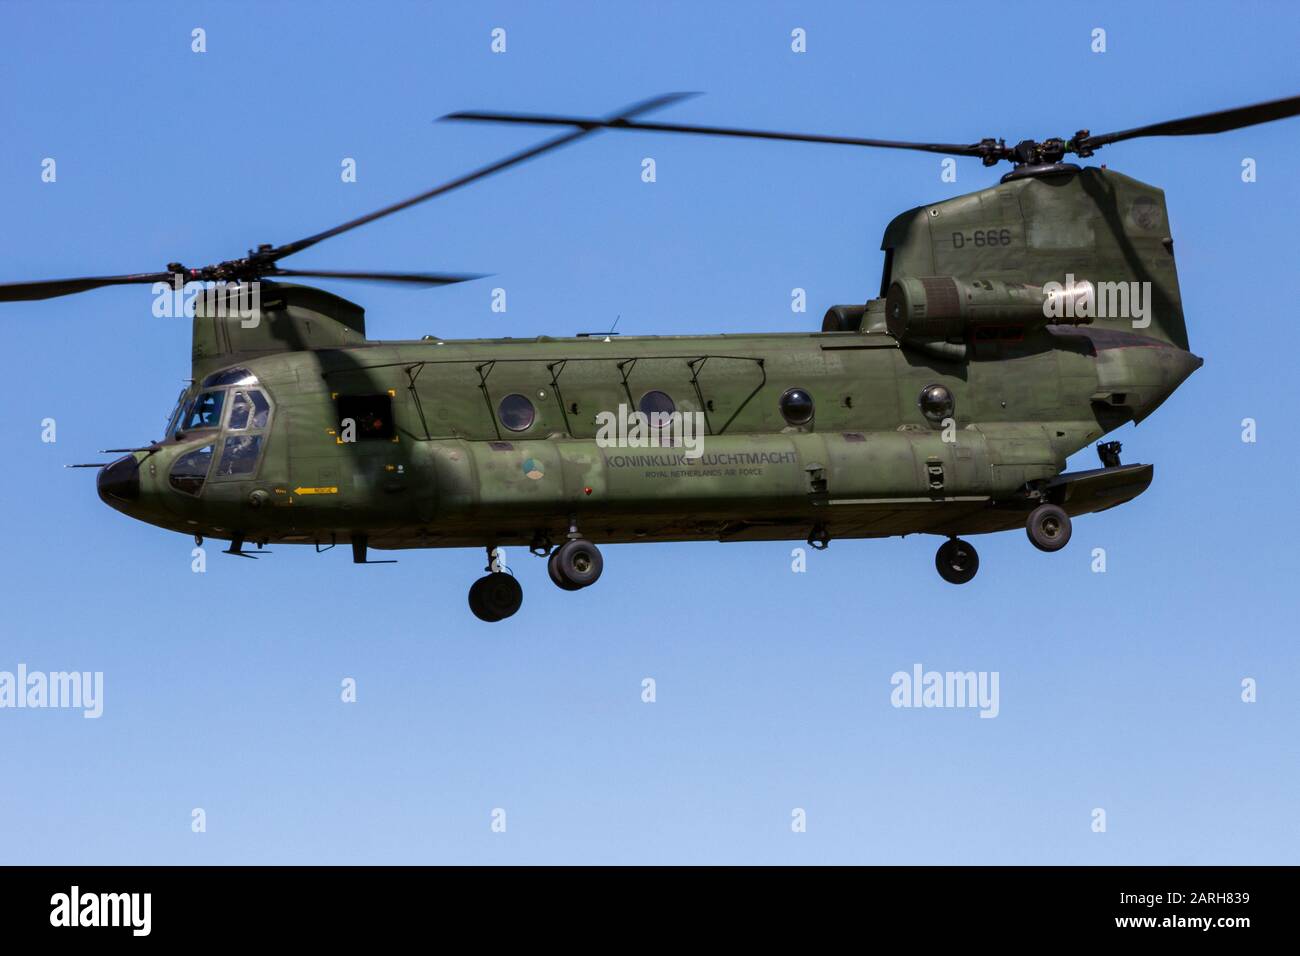 VOLKEL, THE NETHERLANDS - JUN 15, 2013: Royal Netherlands Air Force Boeing CH-47D Chinook transport helicopter in flight. Stock Photo